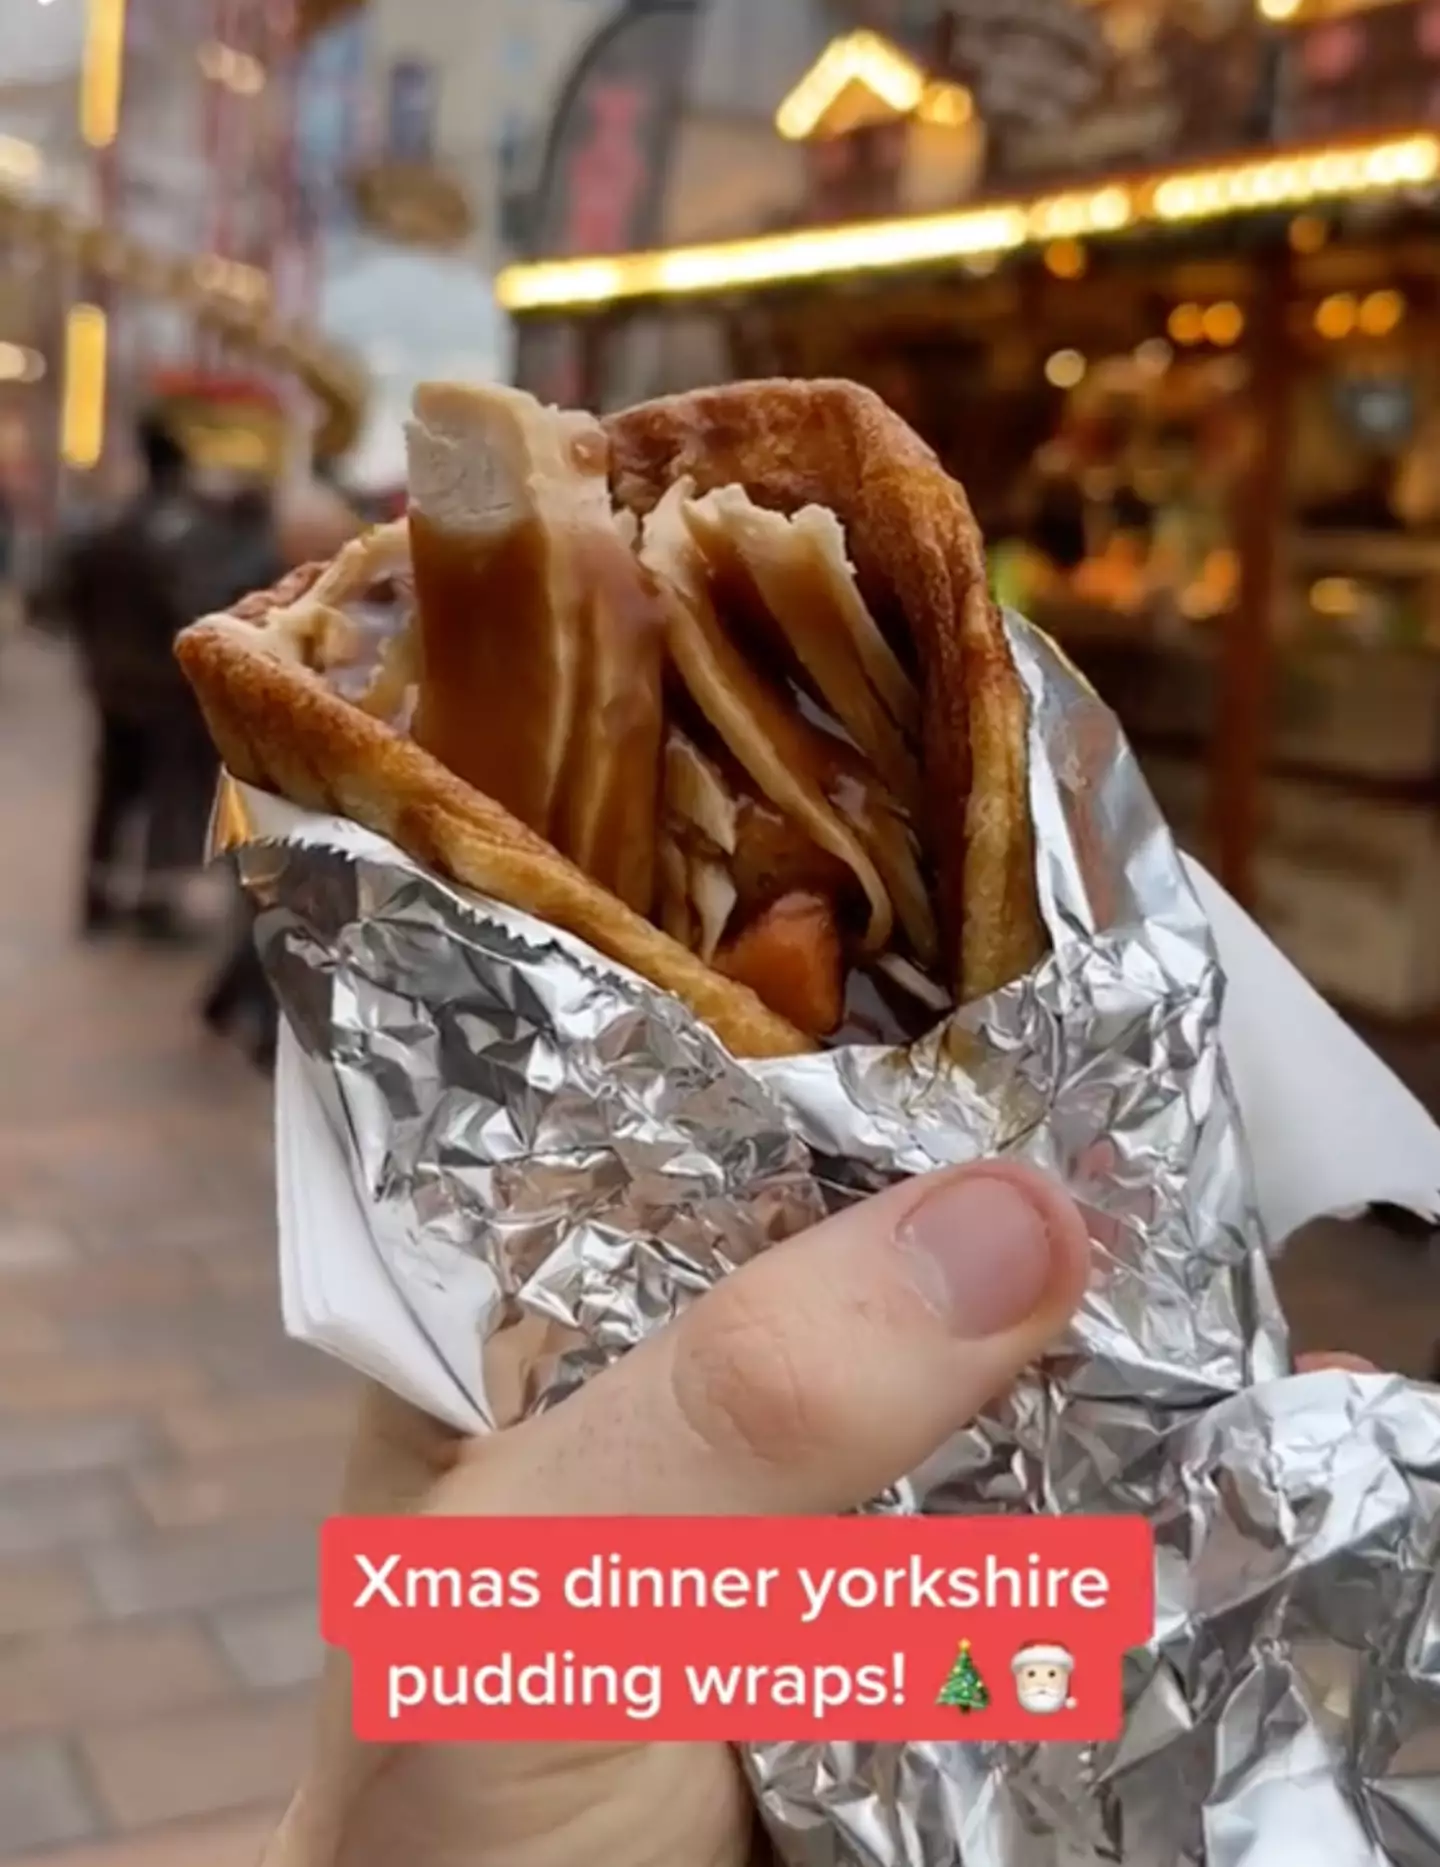 Yorkshire pudding wraps are extremely popular at Christmas markets.